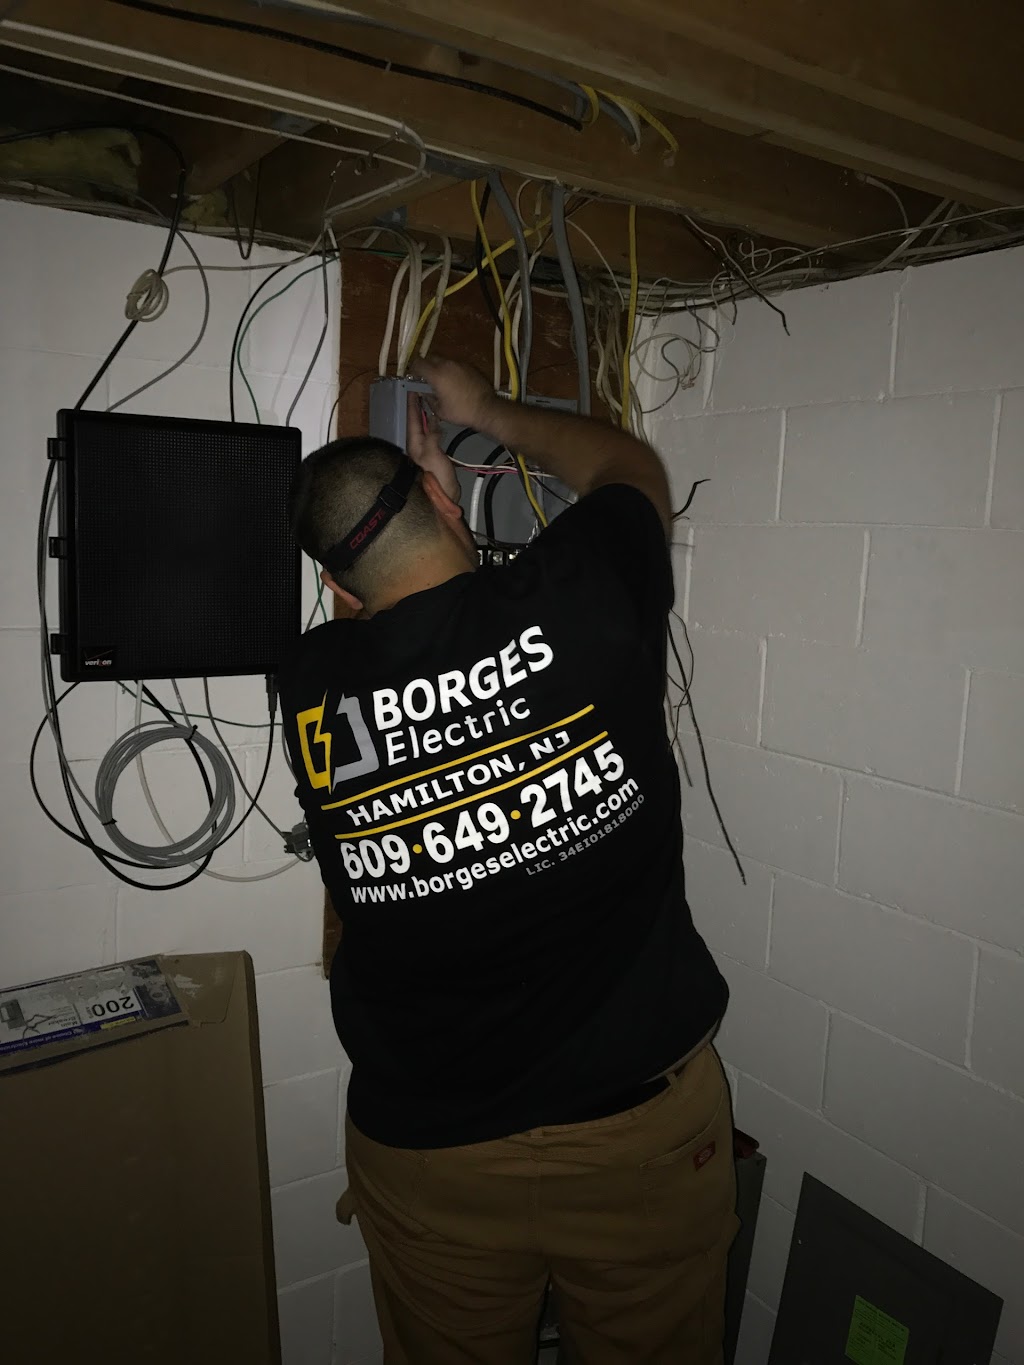 Borges Electric | 70 Youngs Rd, Hamilton Township, NJ 08619 | Phone: (609) 649-2745